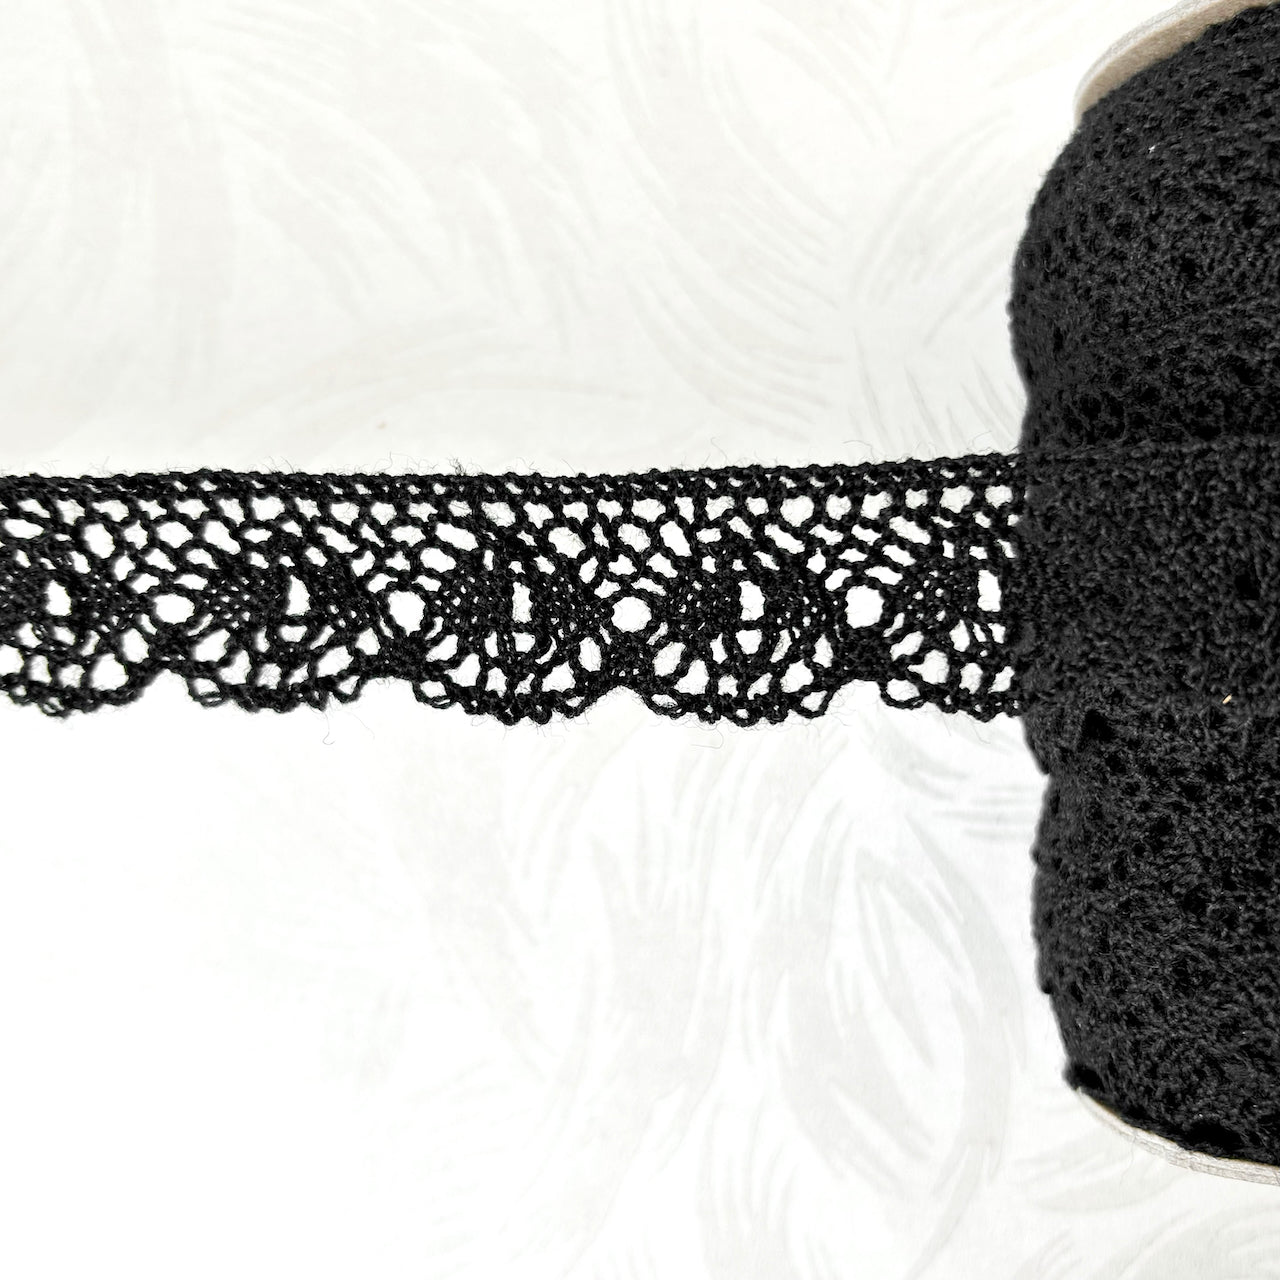     Scalloped_Wool_Cluny_Lace